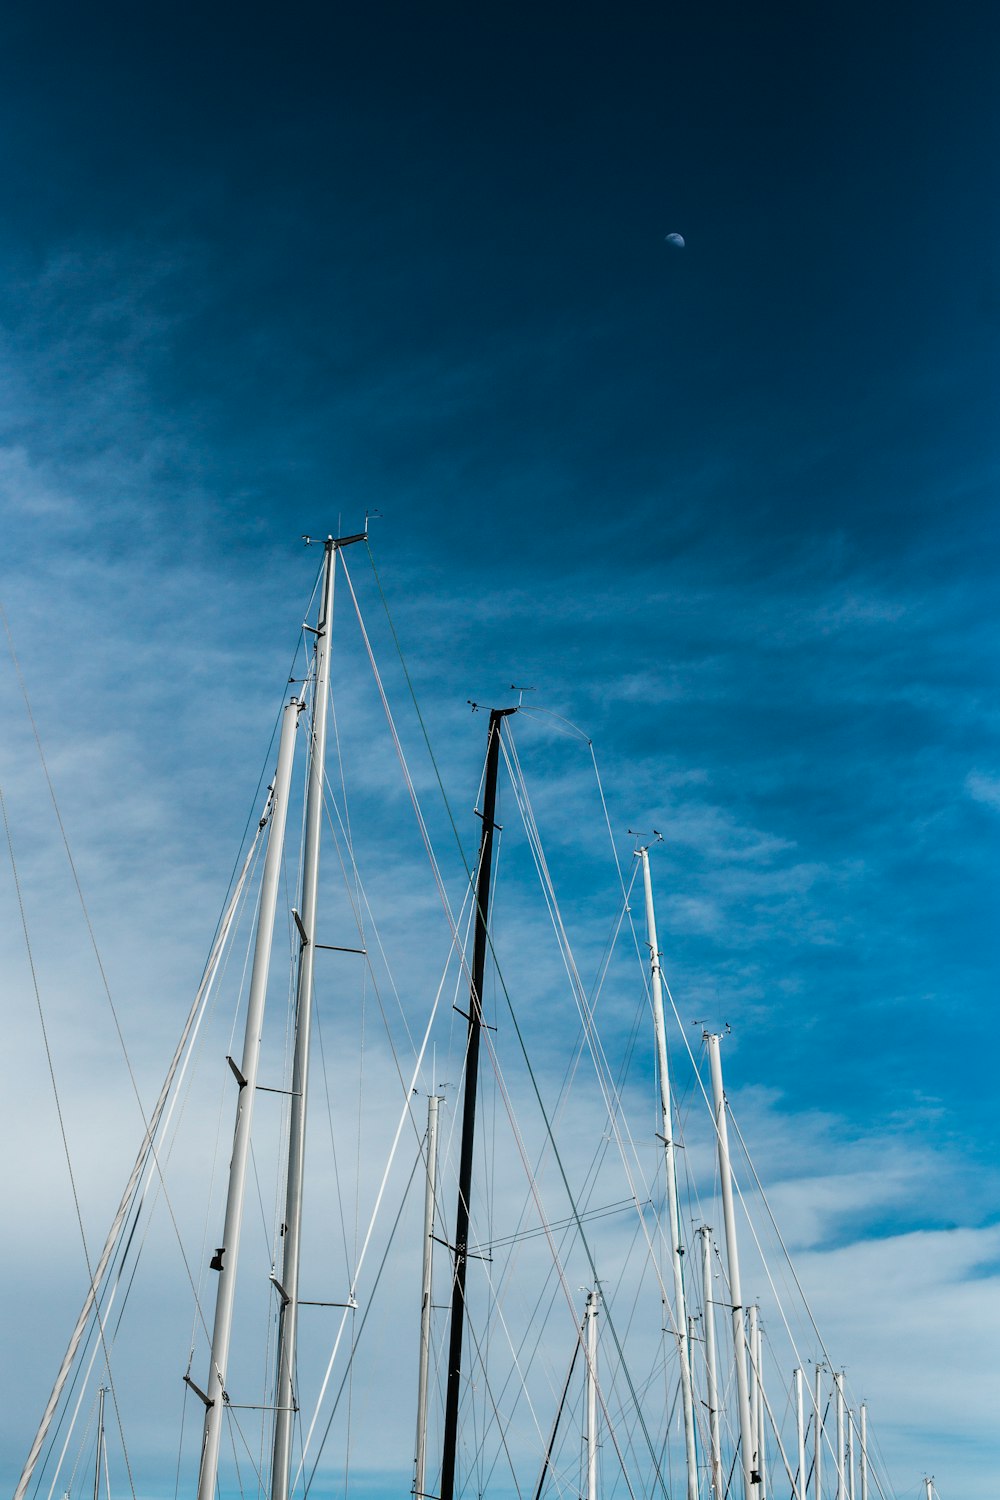 white sail boat on sea under blue sky during daytime